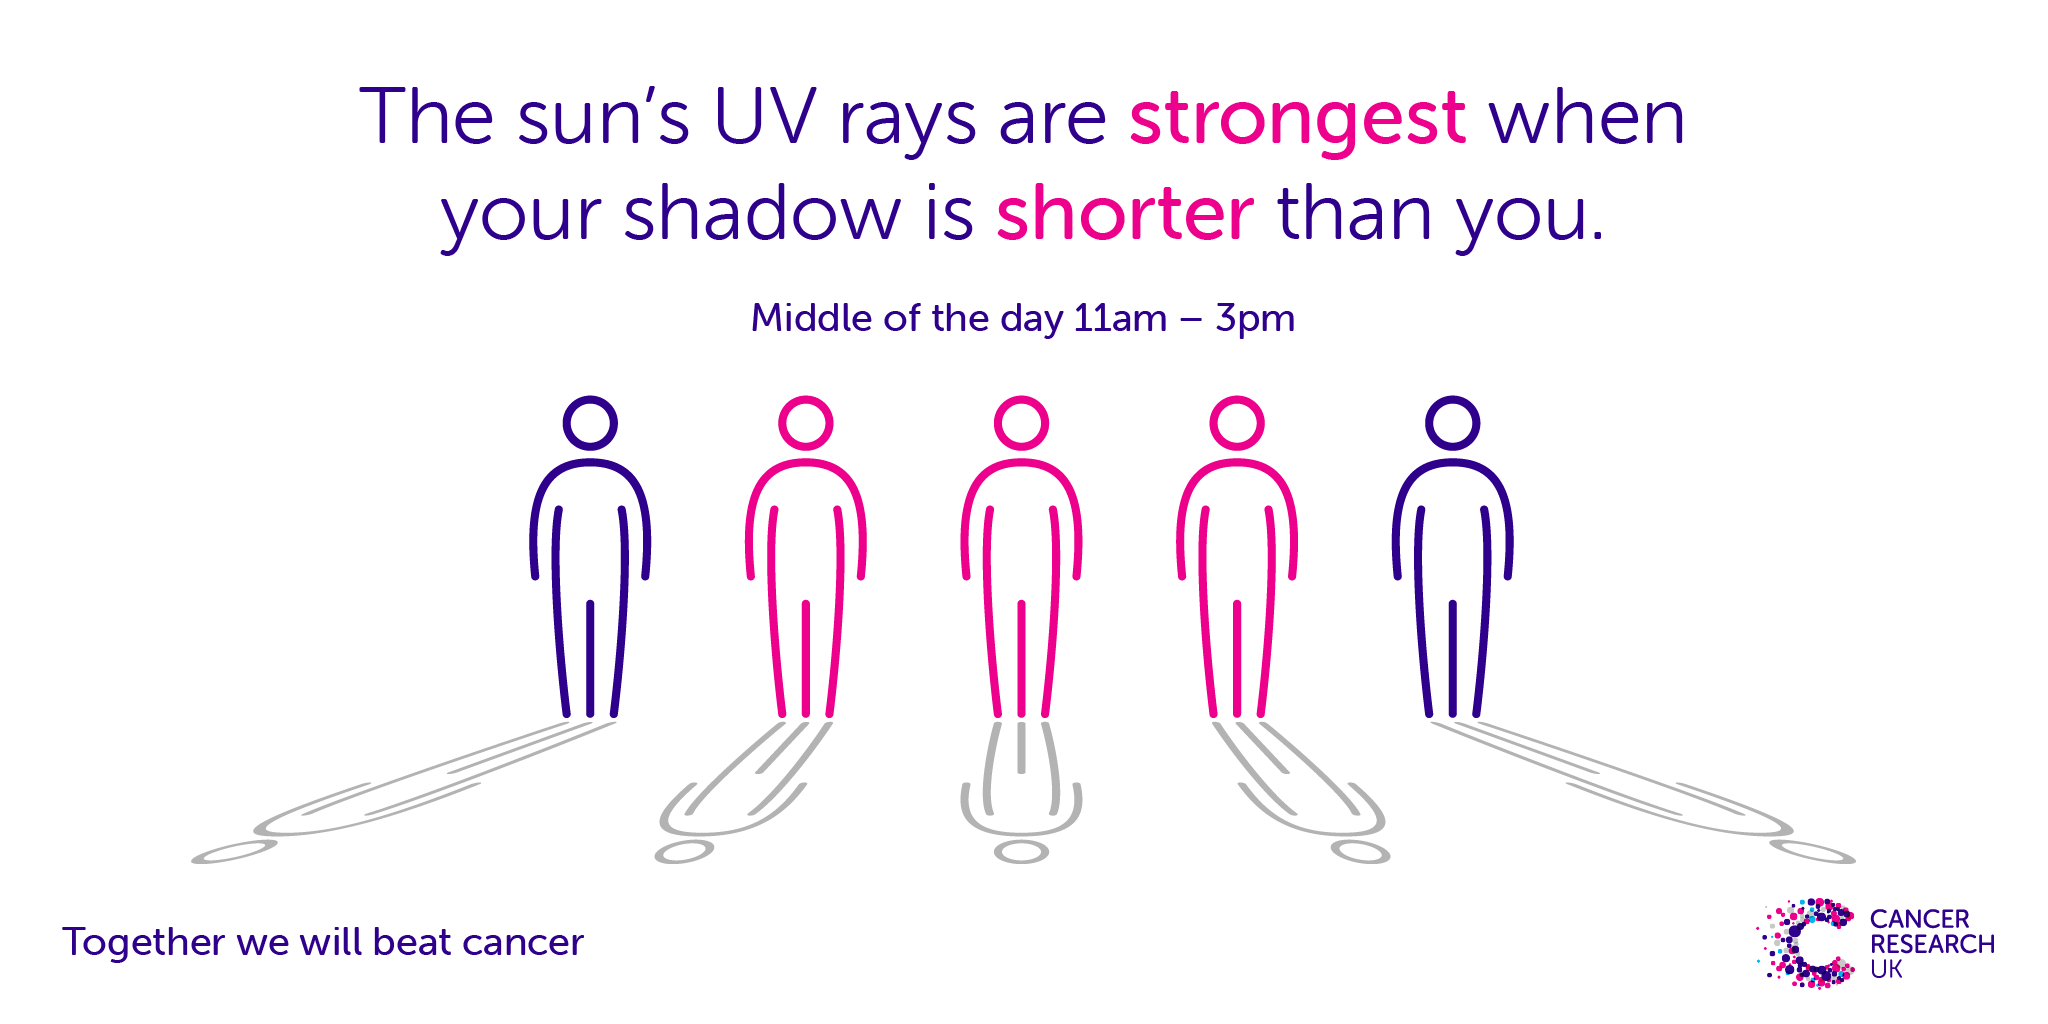 Infographic showing that UV rays are strongest when your shadow is shorter than you